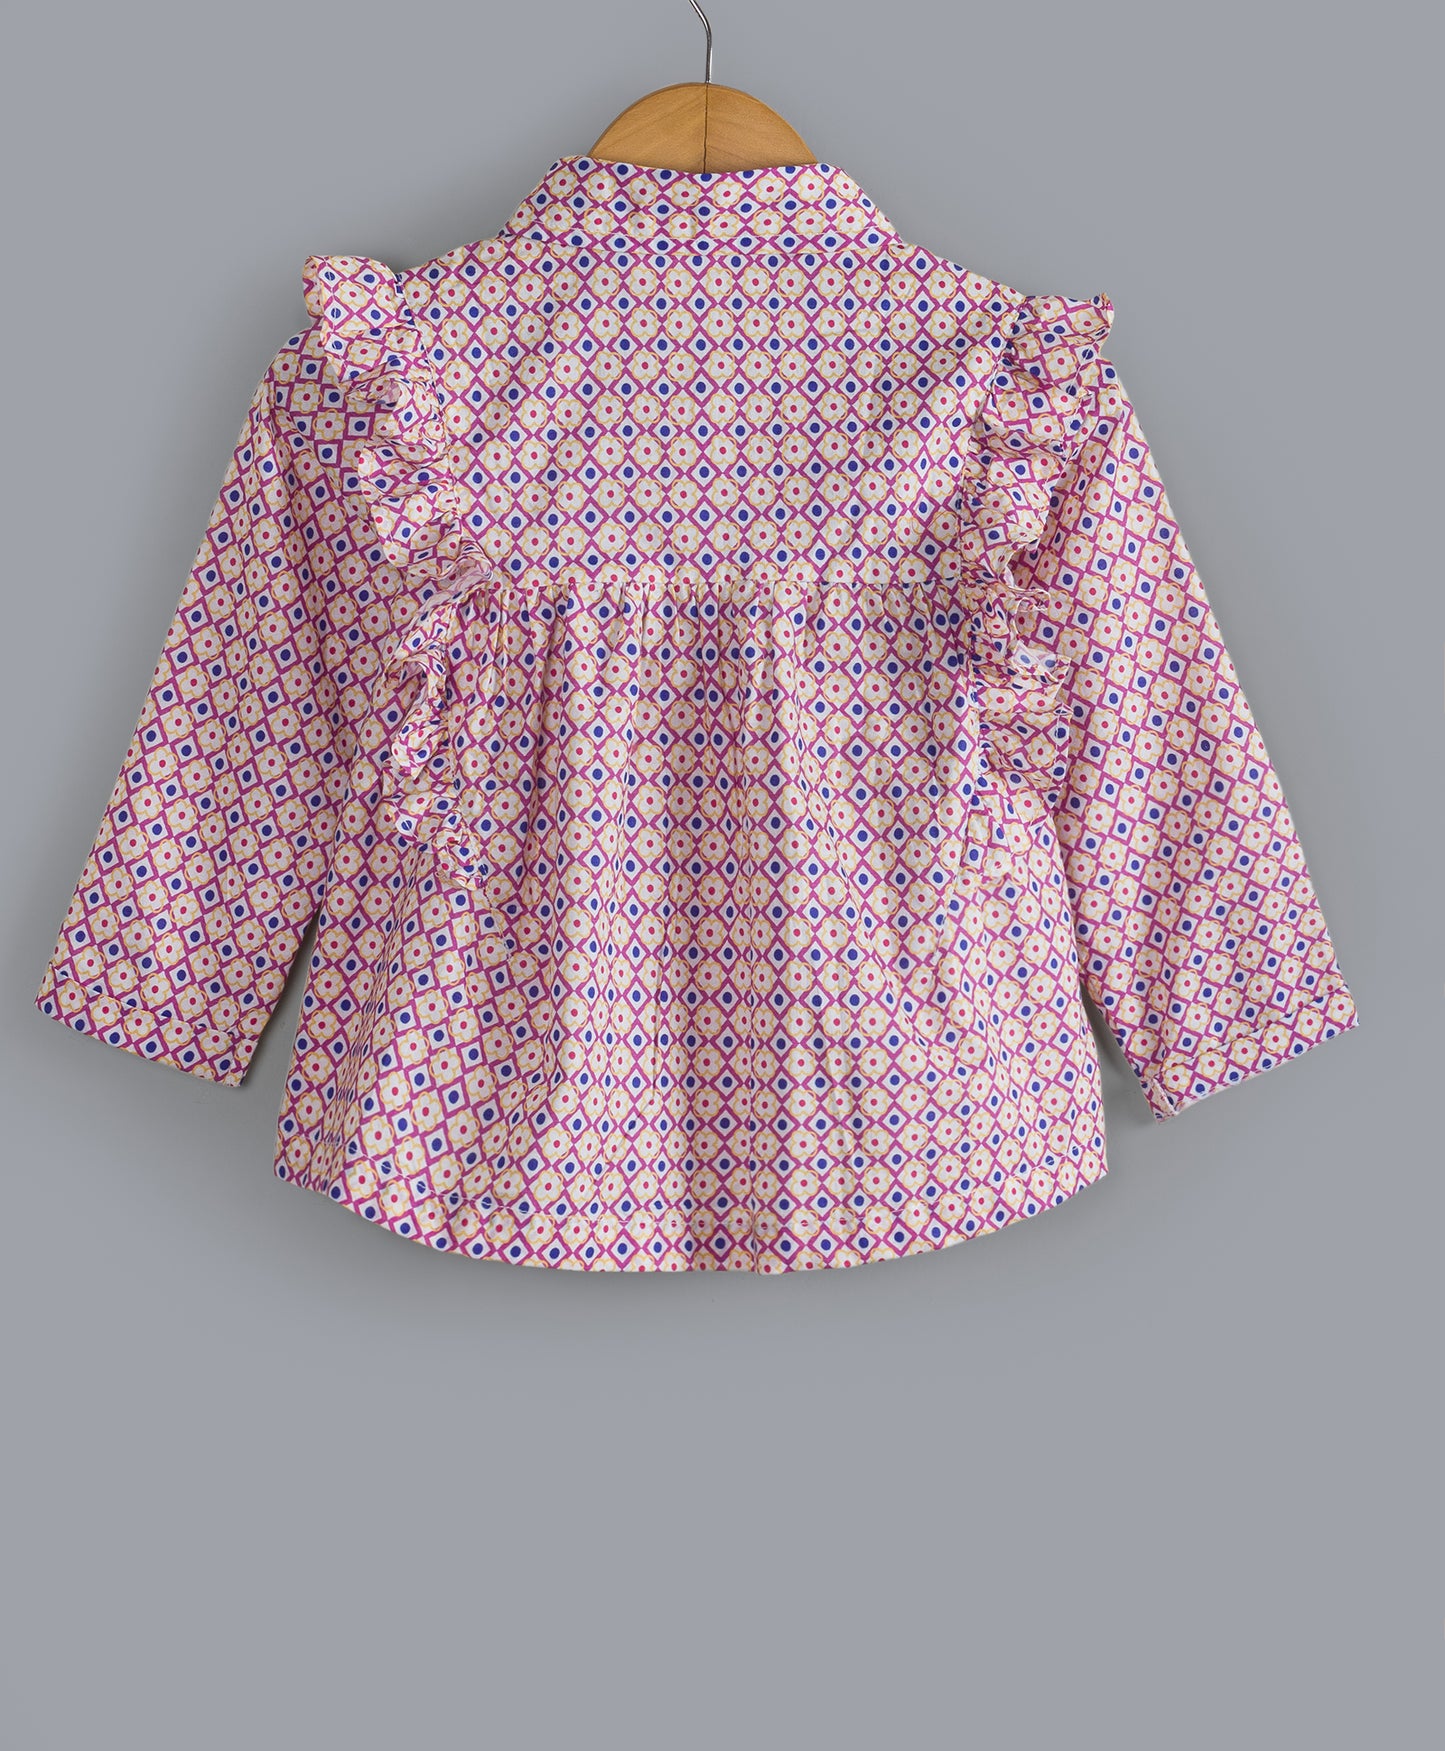 GEOMETRIC PRINT TOP WITH FRILLS ON THE FRONT SIDE